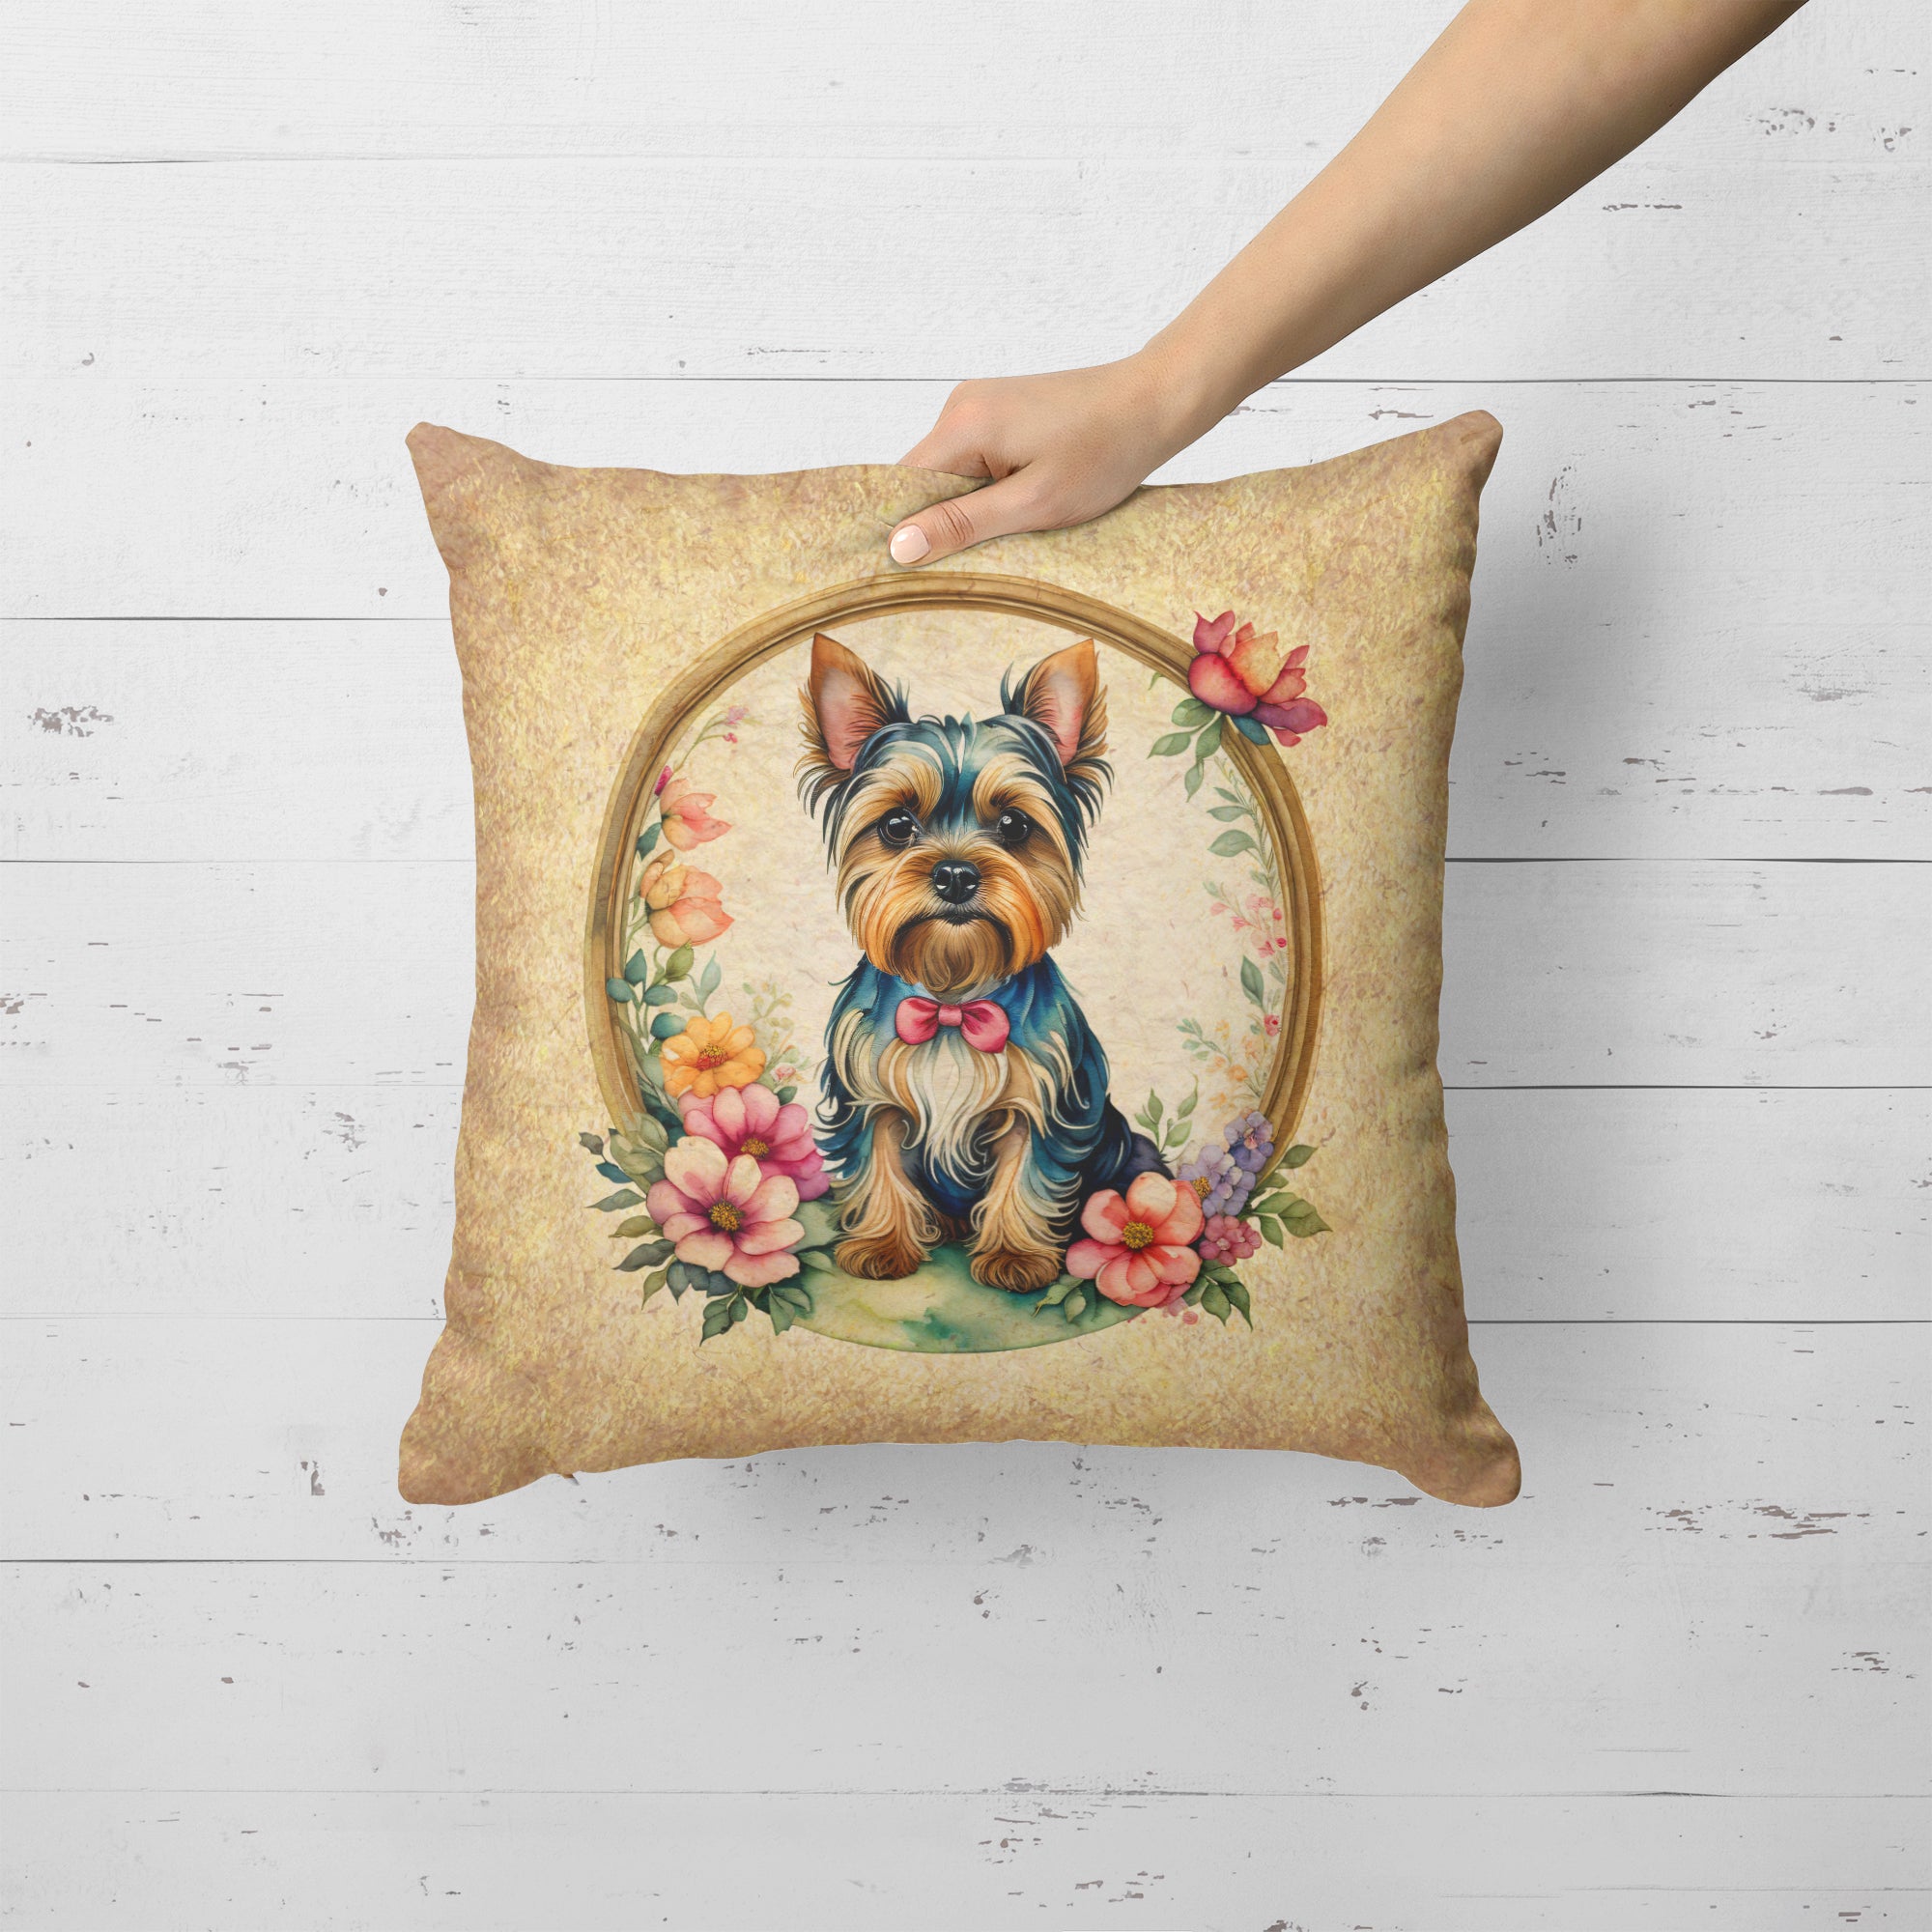 Buy this Yorkshire Terrier and Flowers Fabric Decorative Pillow